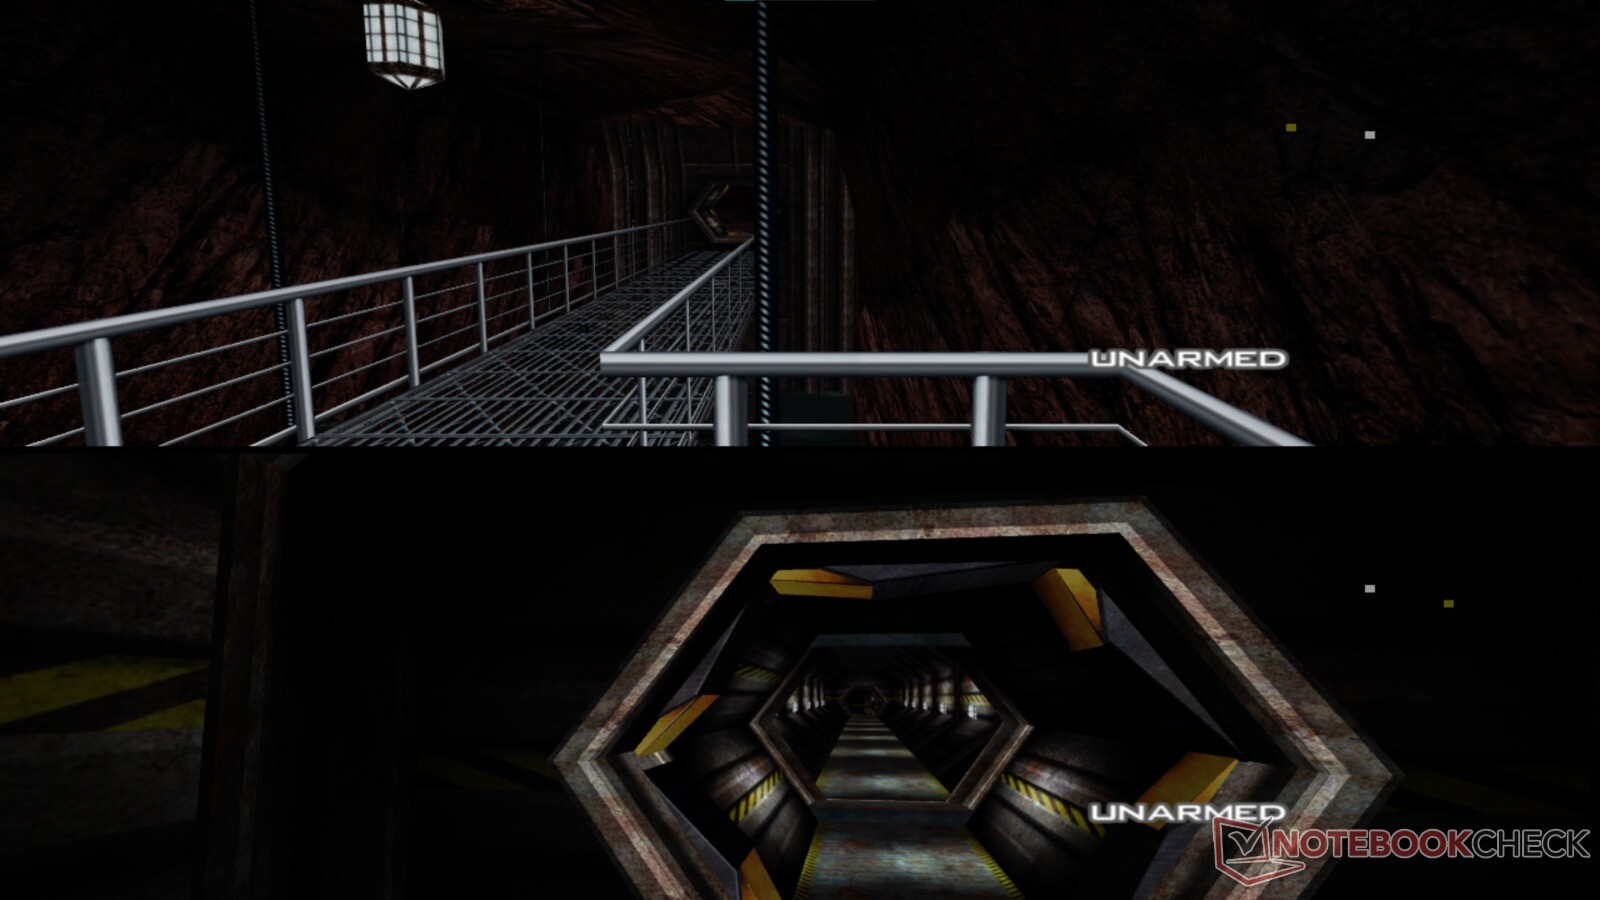 A cancelled Xbox 360 remake of GoldenEye is now playable on PC